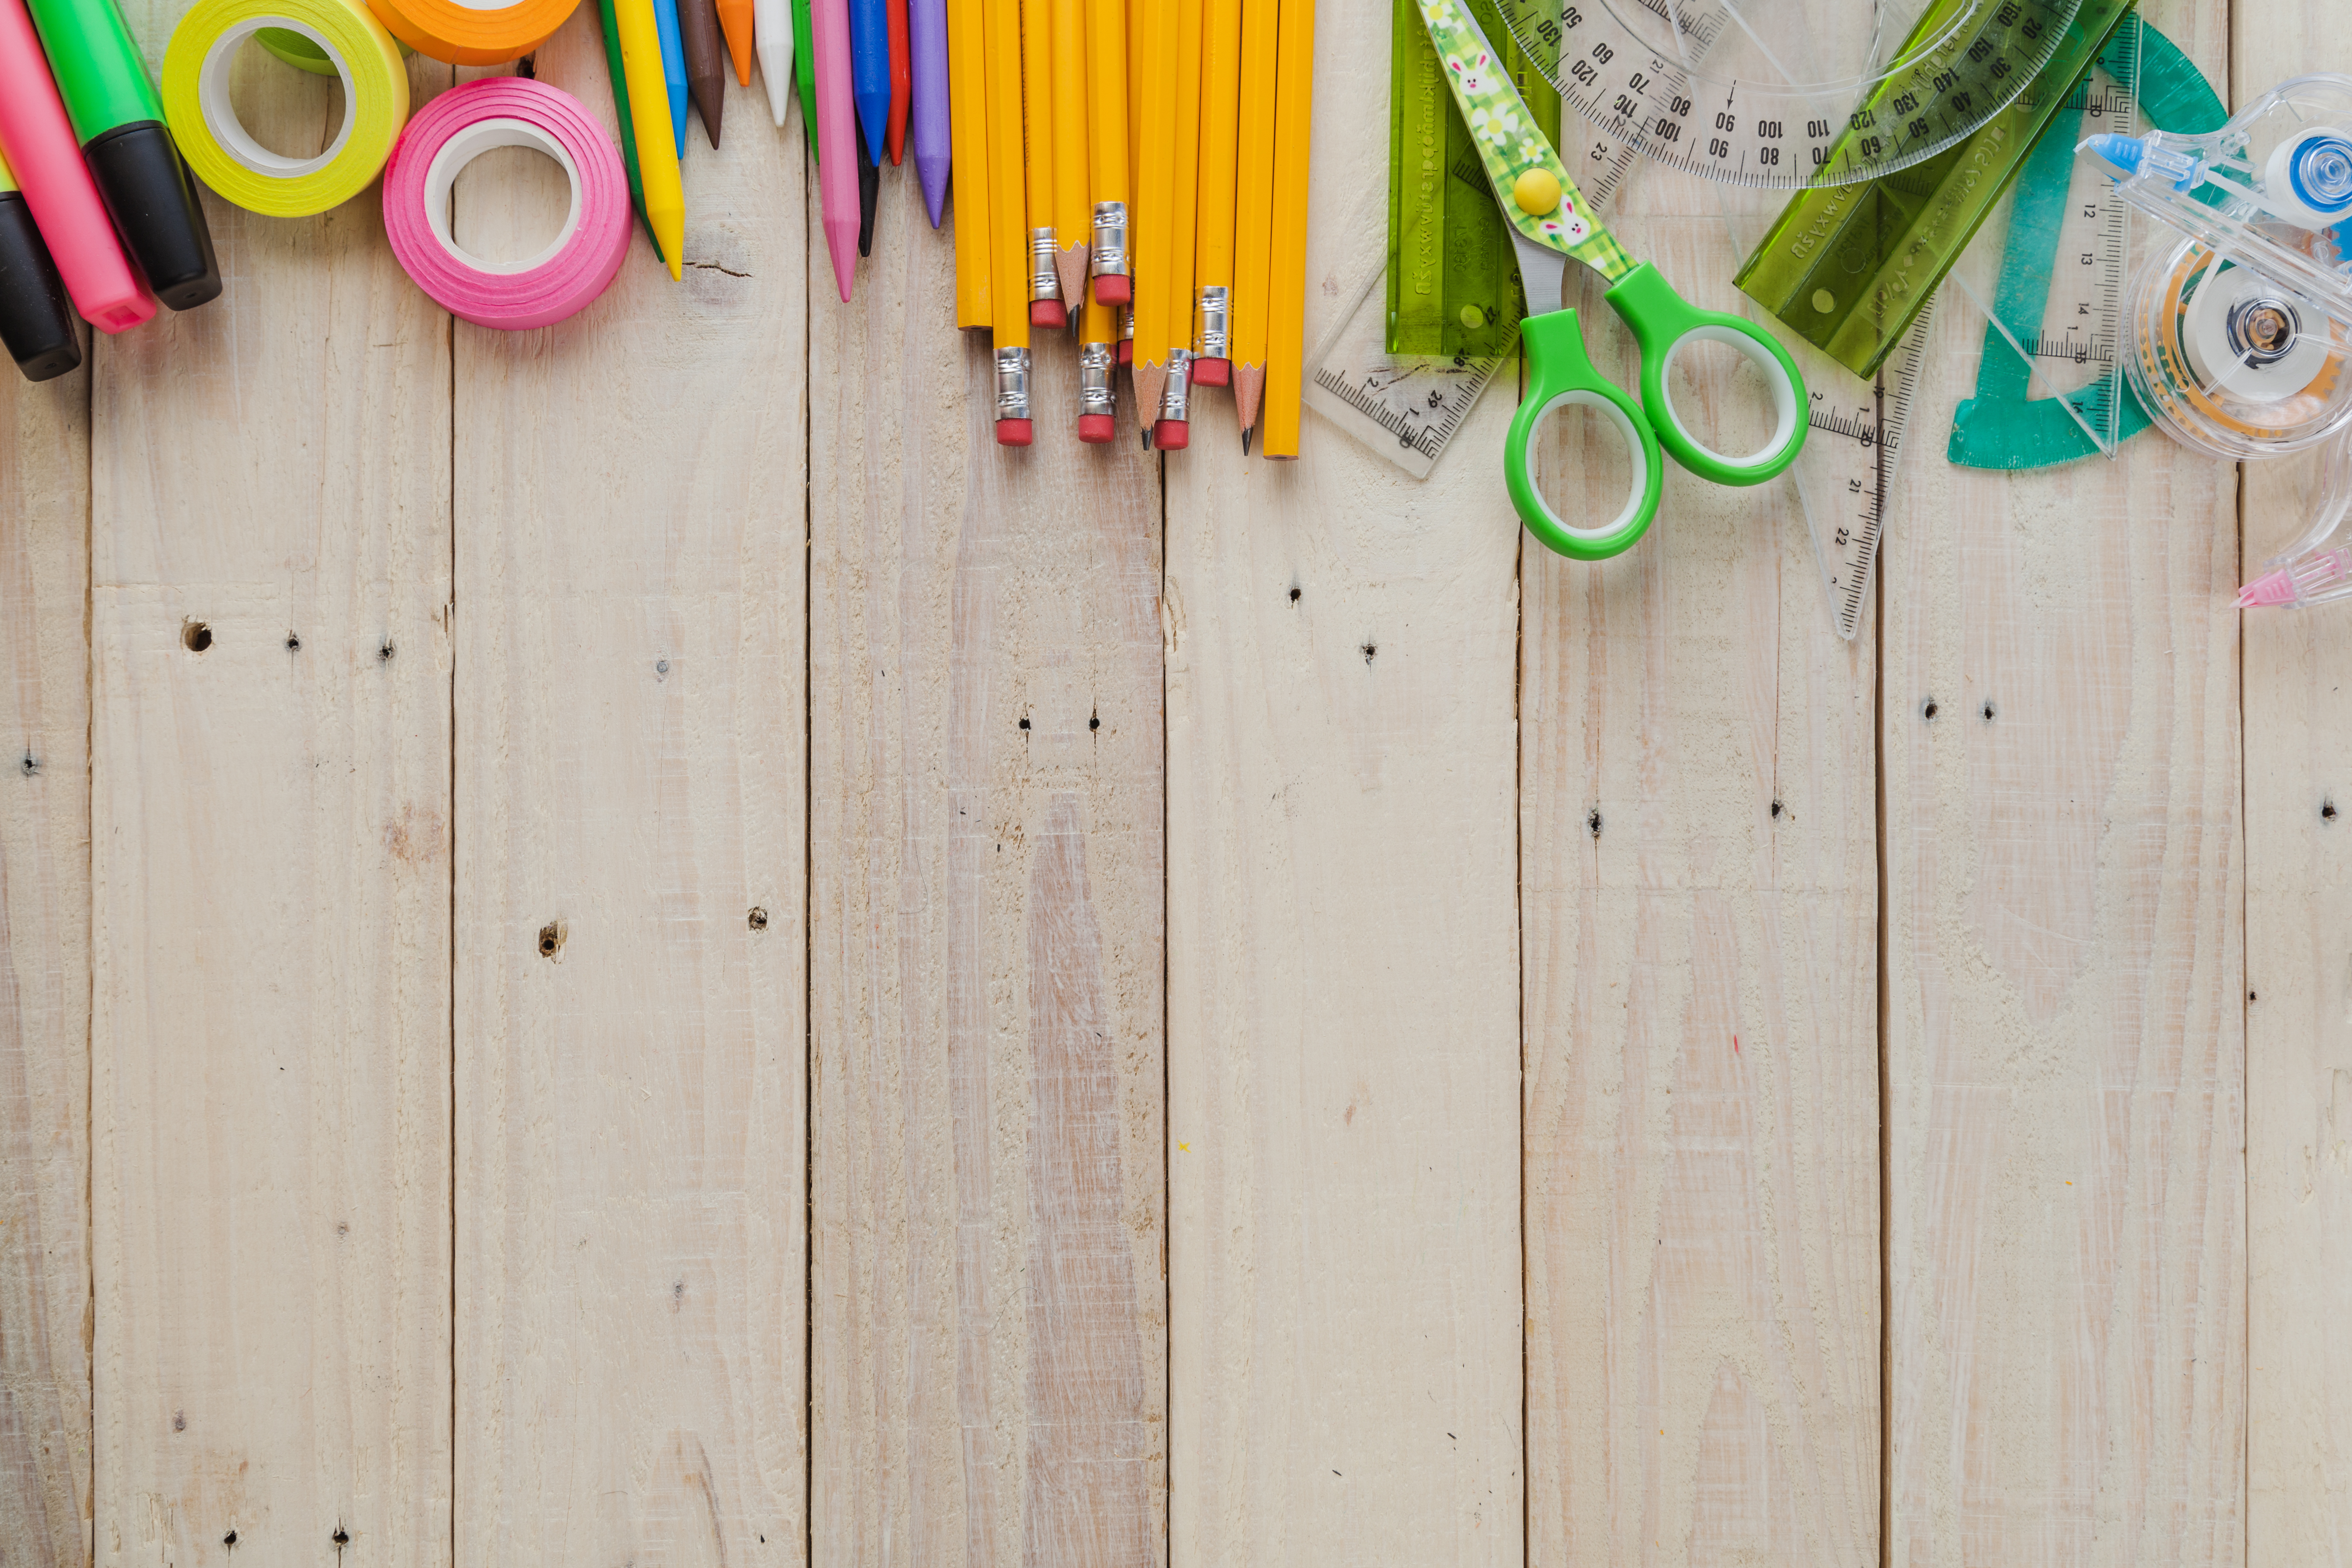 Various craft supplies including pencils, scissors, and tape on a wooden plank background.